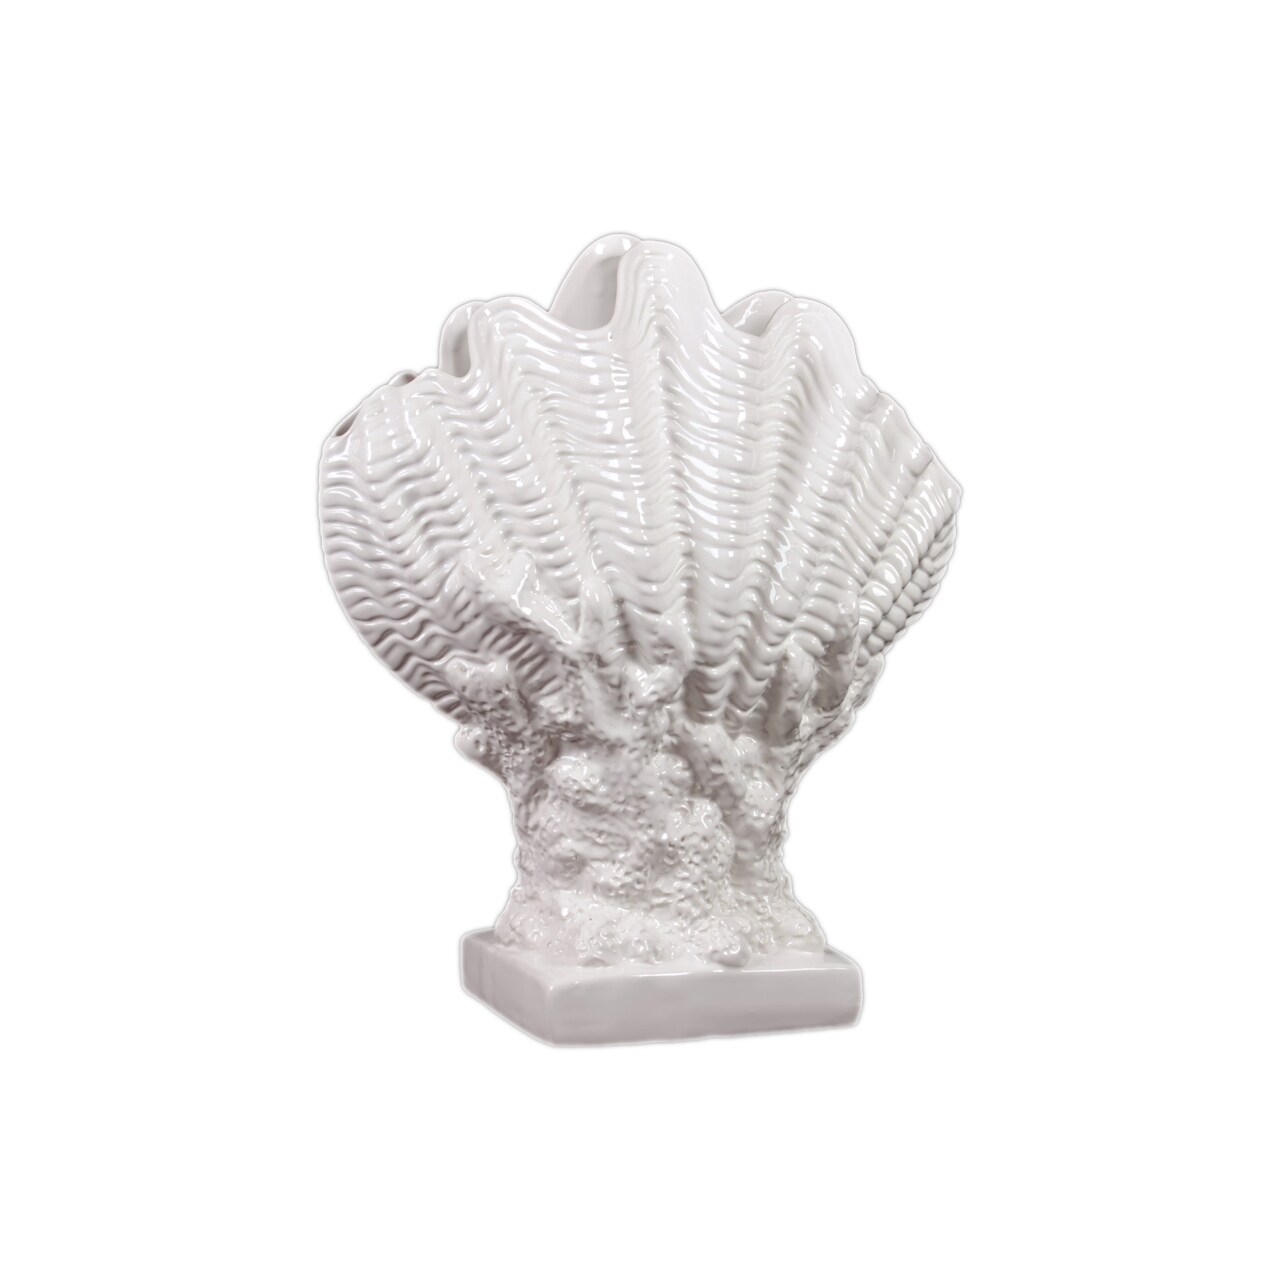 Urban Trends Collection White Ceramic Seashell (CeramicDimensions 12.13 inches x 6.57 inches x 14.57 inches high UPC 877101400066For Decorative purposes only)